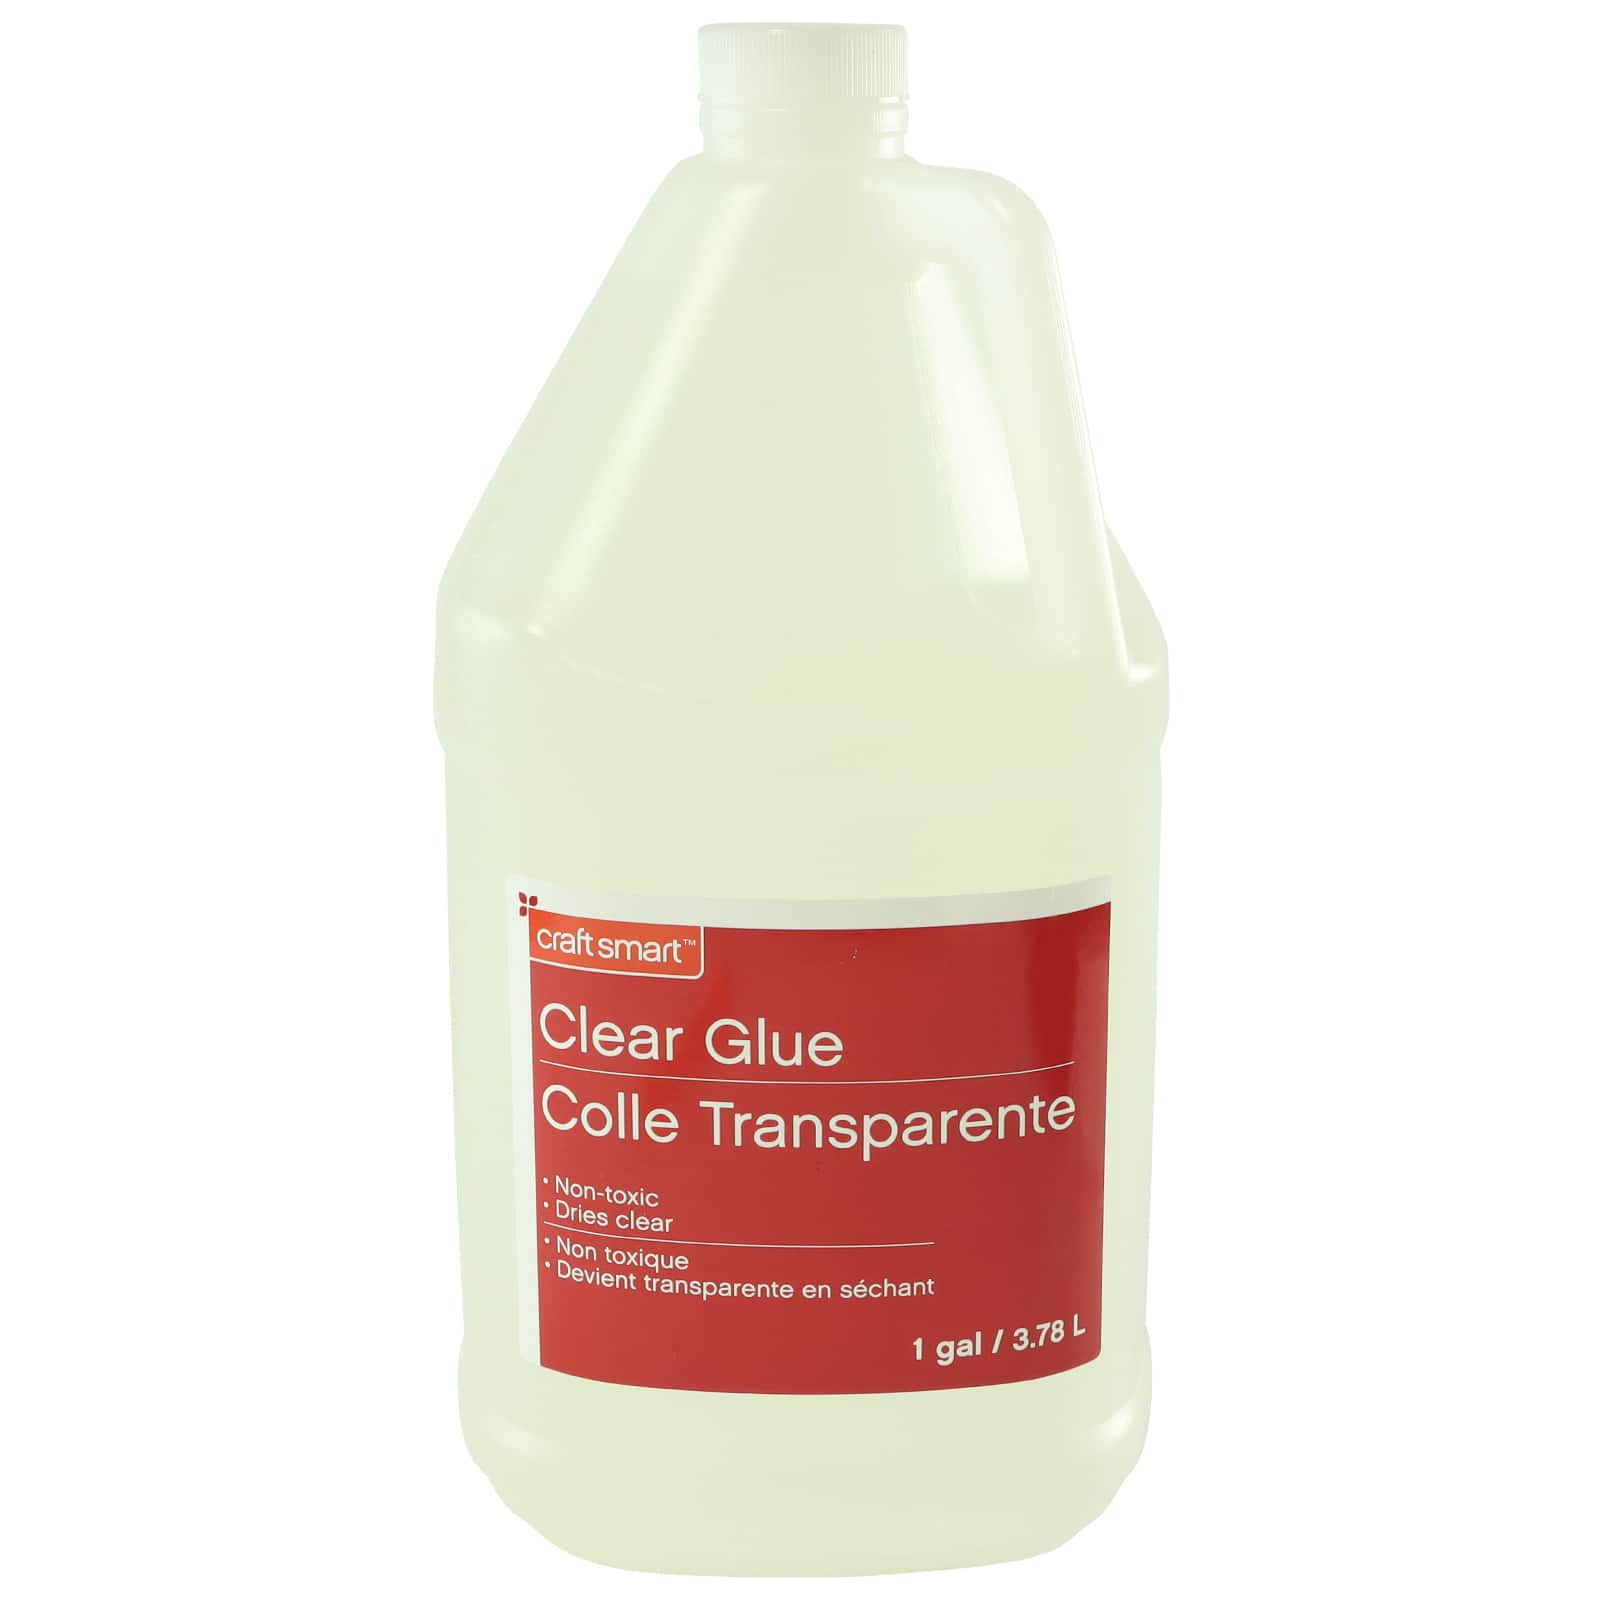 Strongest Glue Clear Glue For Crafts Kids Glue With Advanced Manufacturing  And Isolation Liquid To Isolate